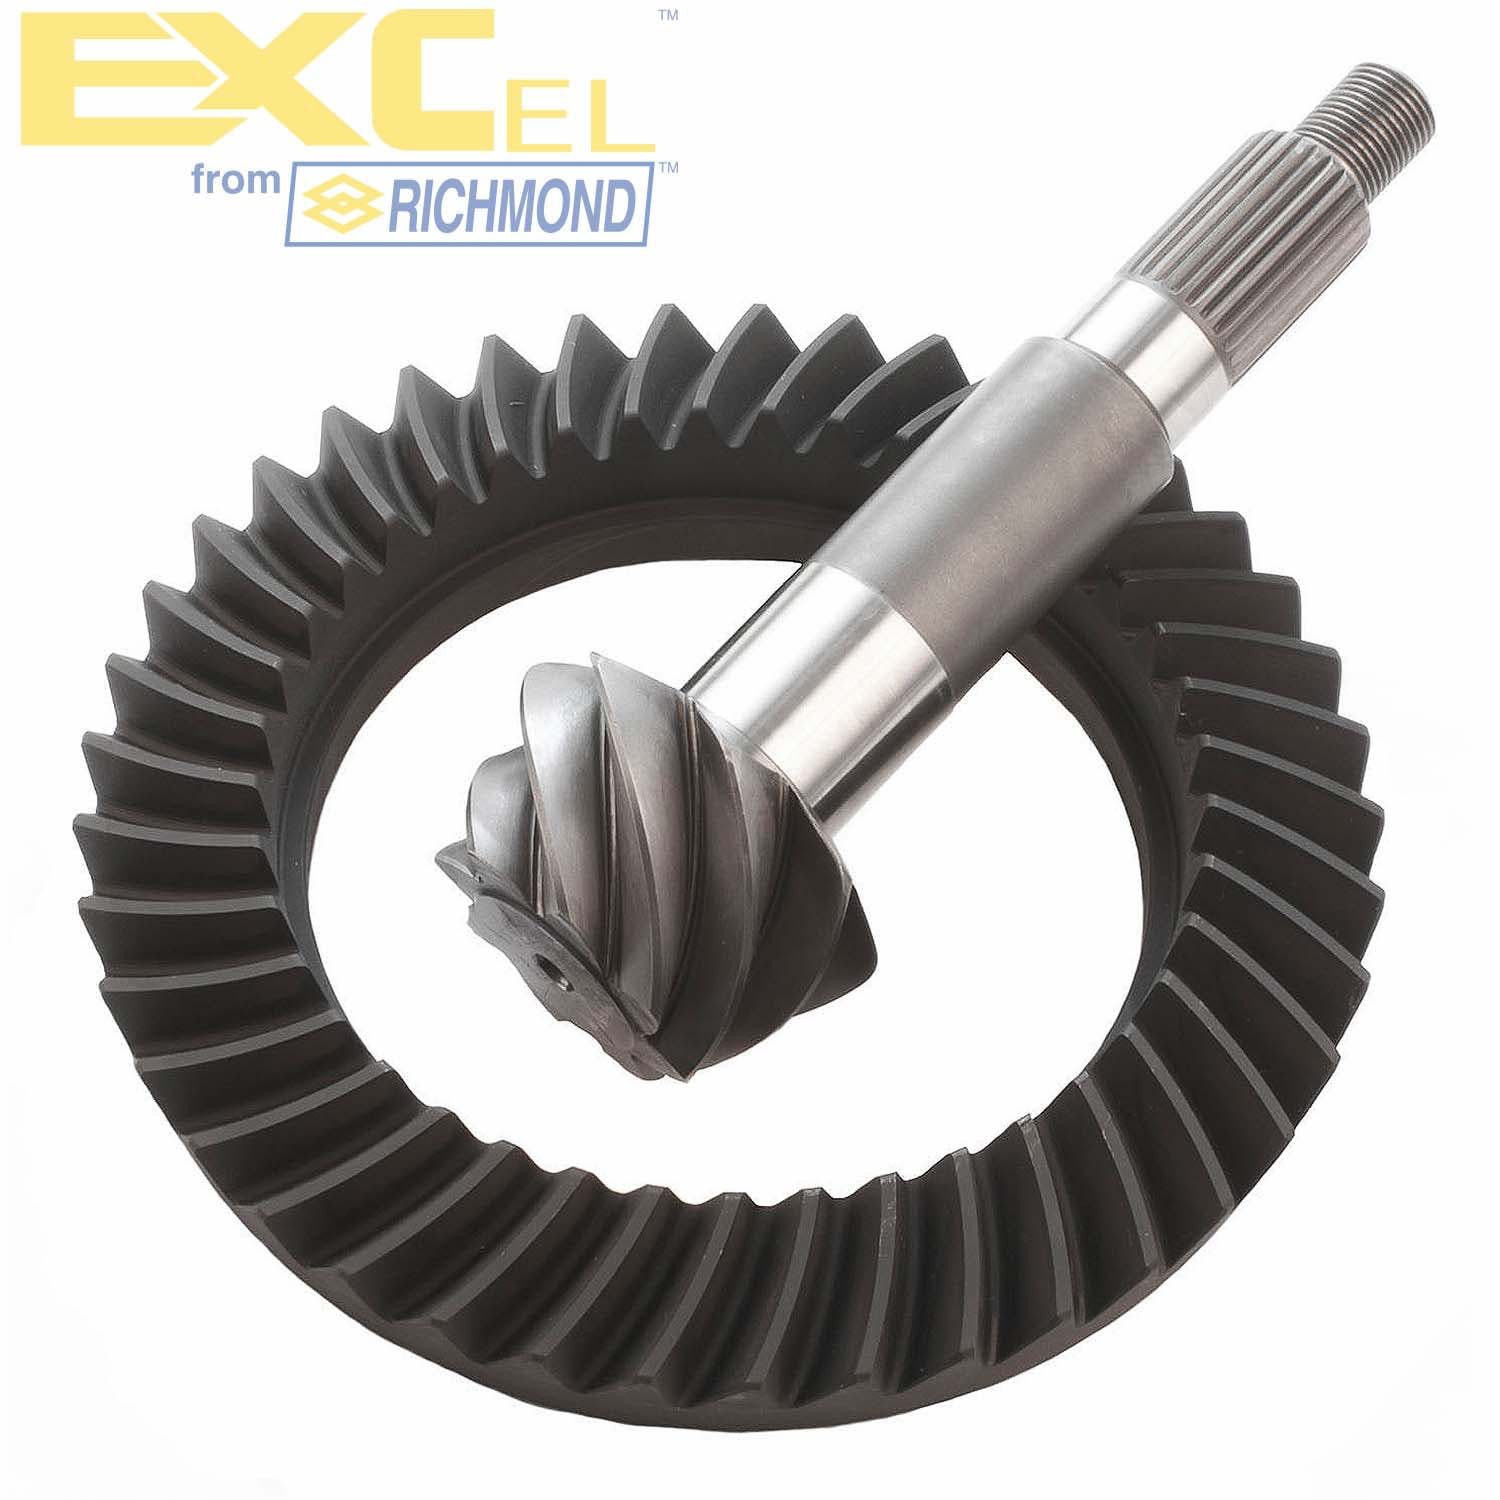 Excel D44513 Differential Ring and Pinion